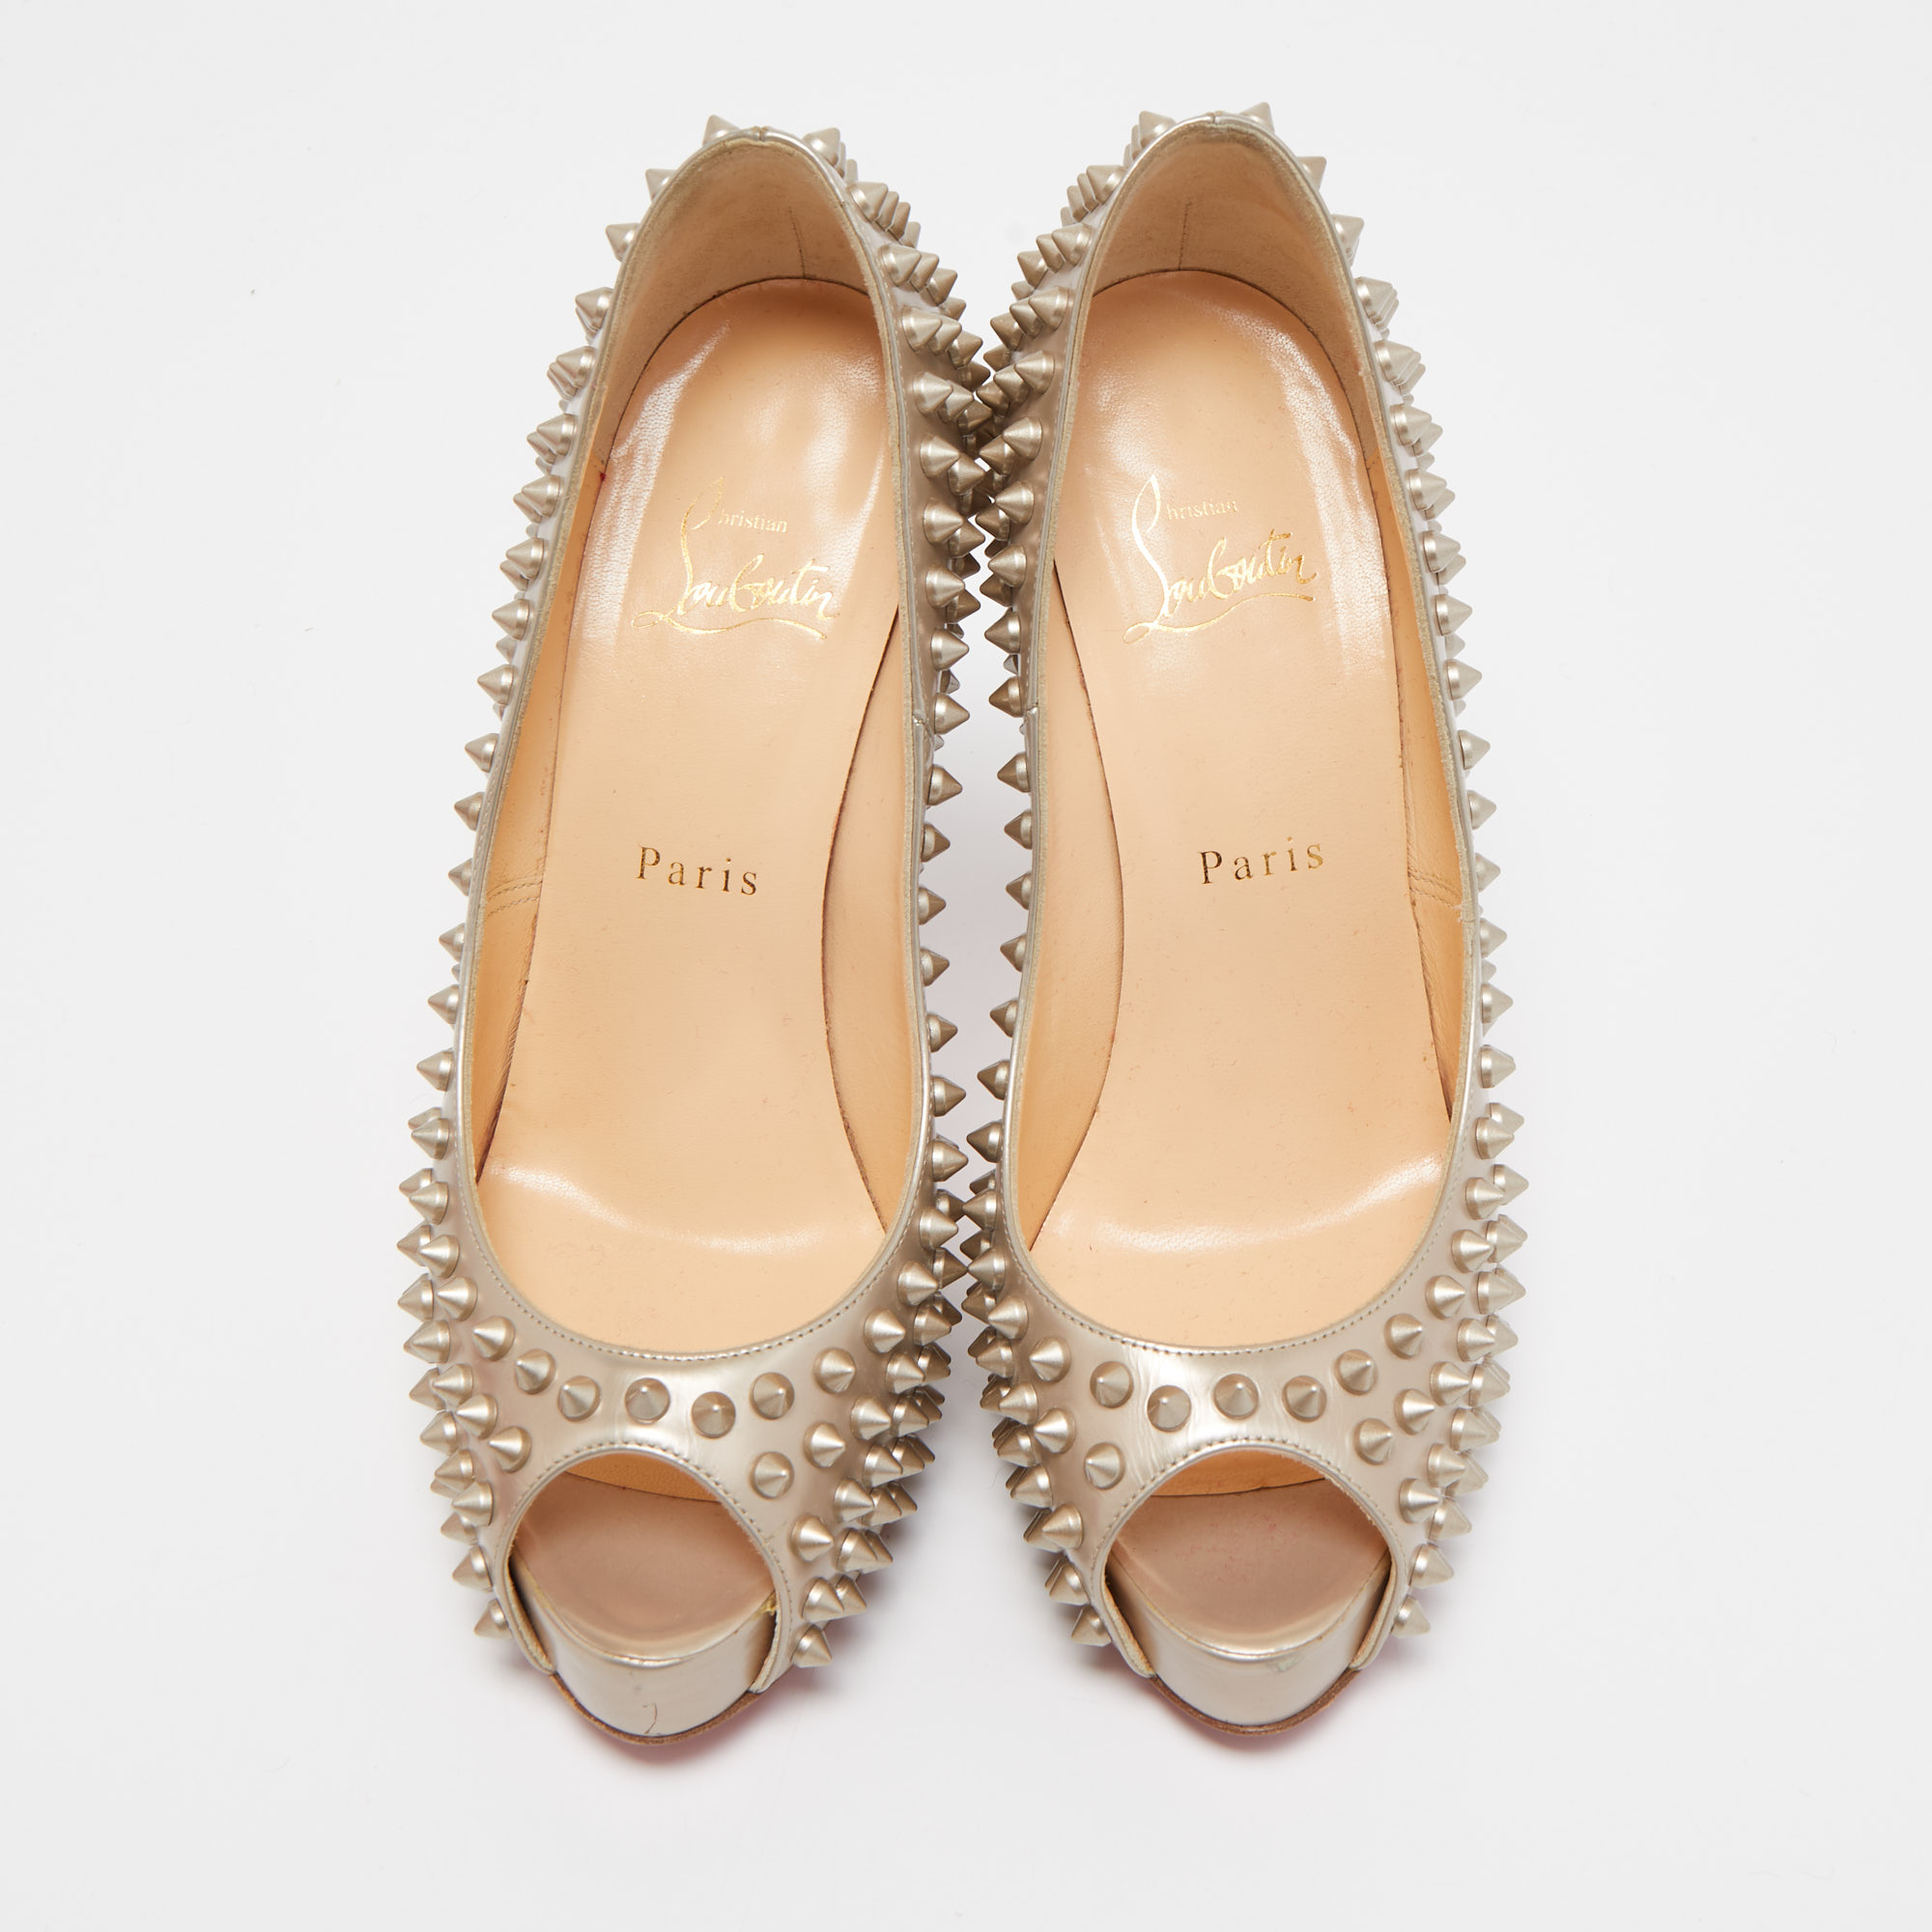 Christian Louboutin Beige Leather Very Prive Spike Pumps Size 37.5